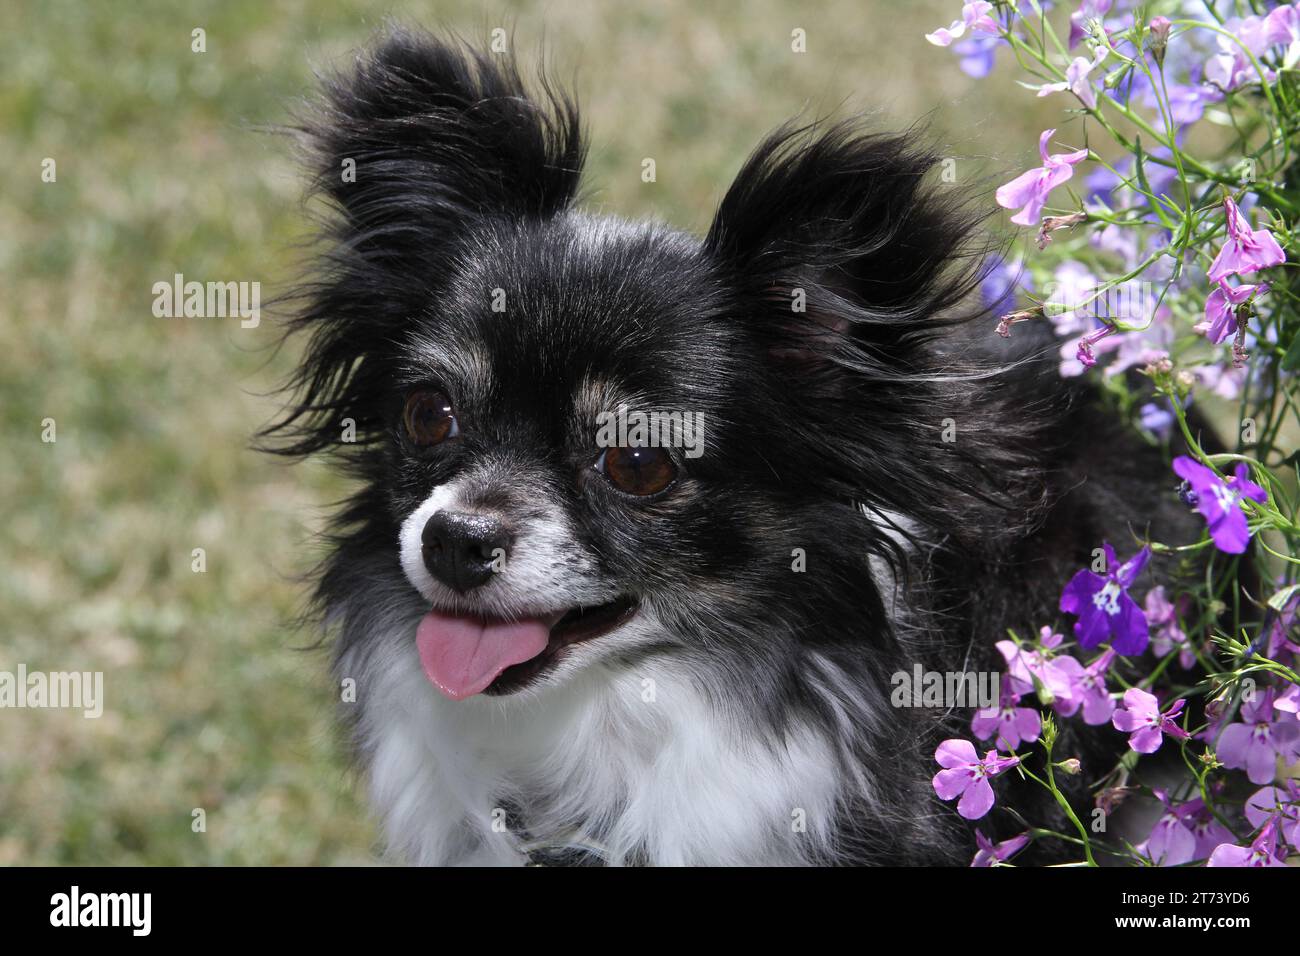 Chihuahua, Longhaired portrait next to flowers. Grass in background Stock Photo